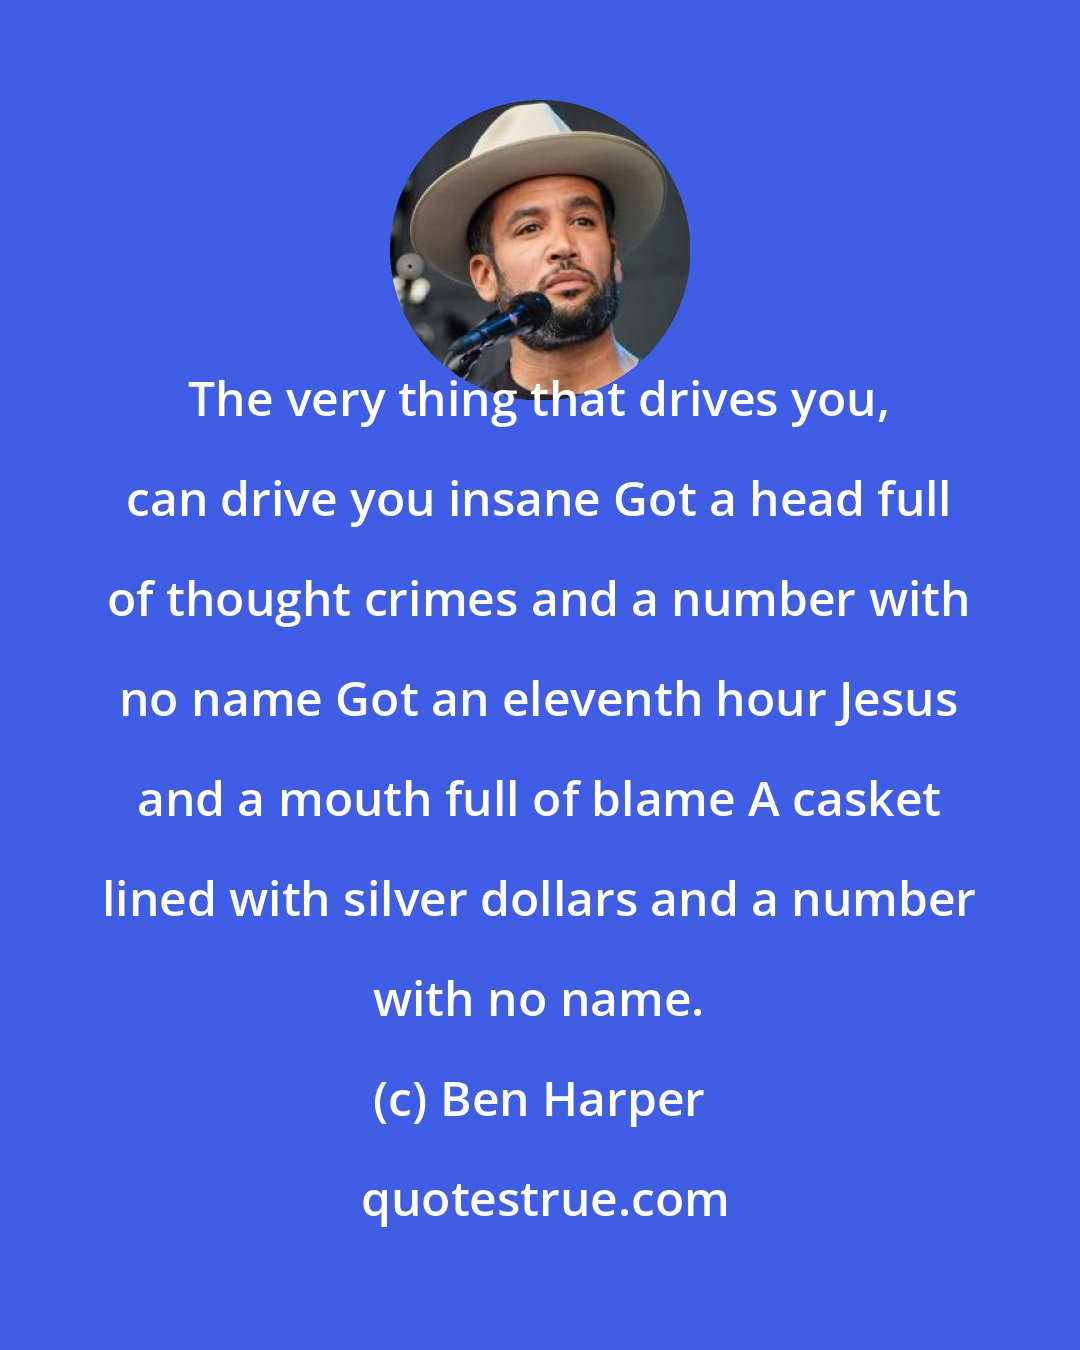 Ben Harper: The very thing that drives you, can drive you insane Got a head full of thought crimes and a number with no name Got an eleventh hour Jesus and a mouth full of blame A casket lined with silver dollars and a number with no name.